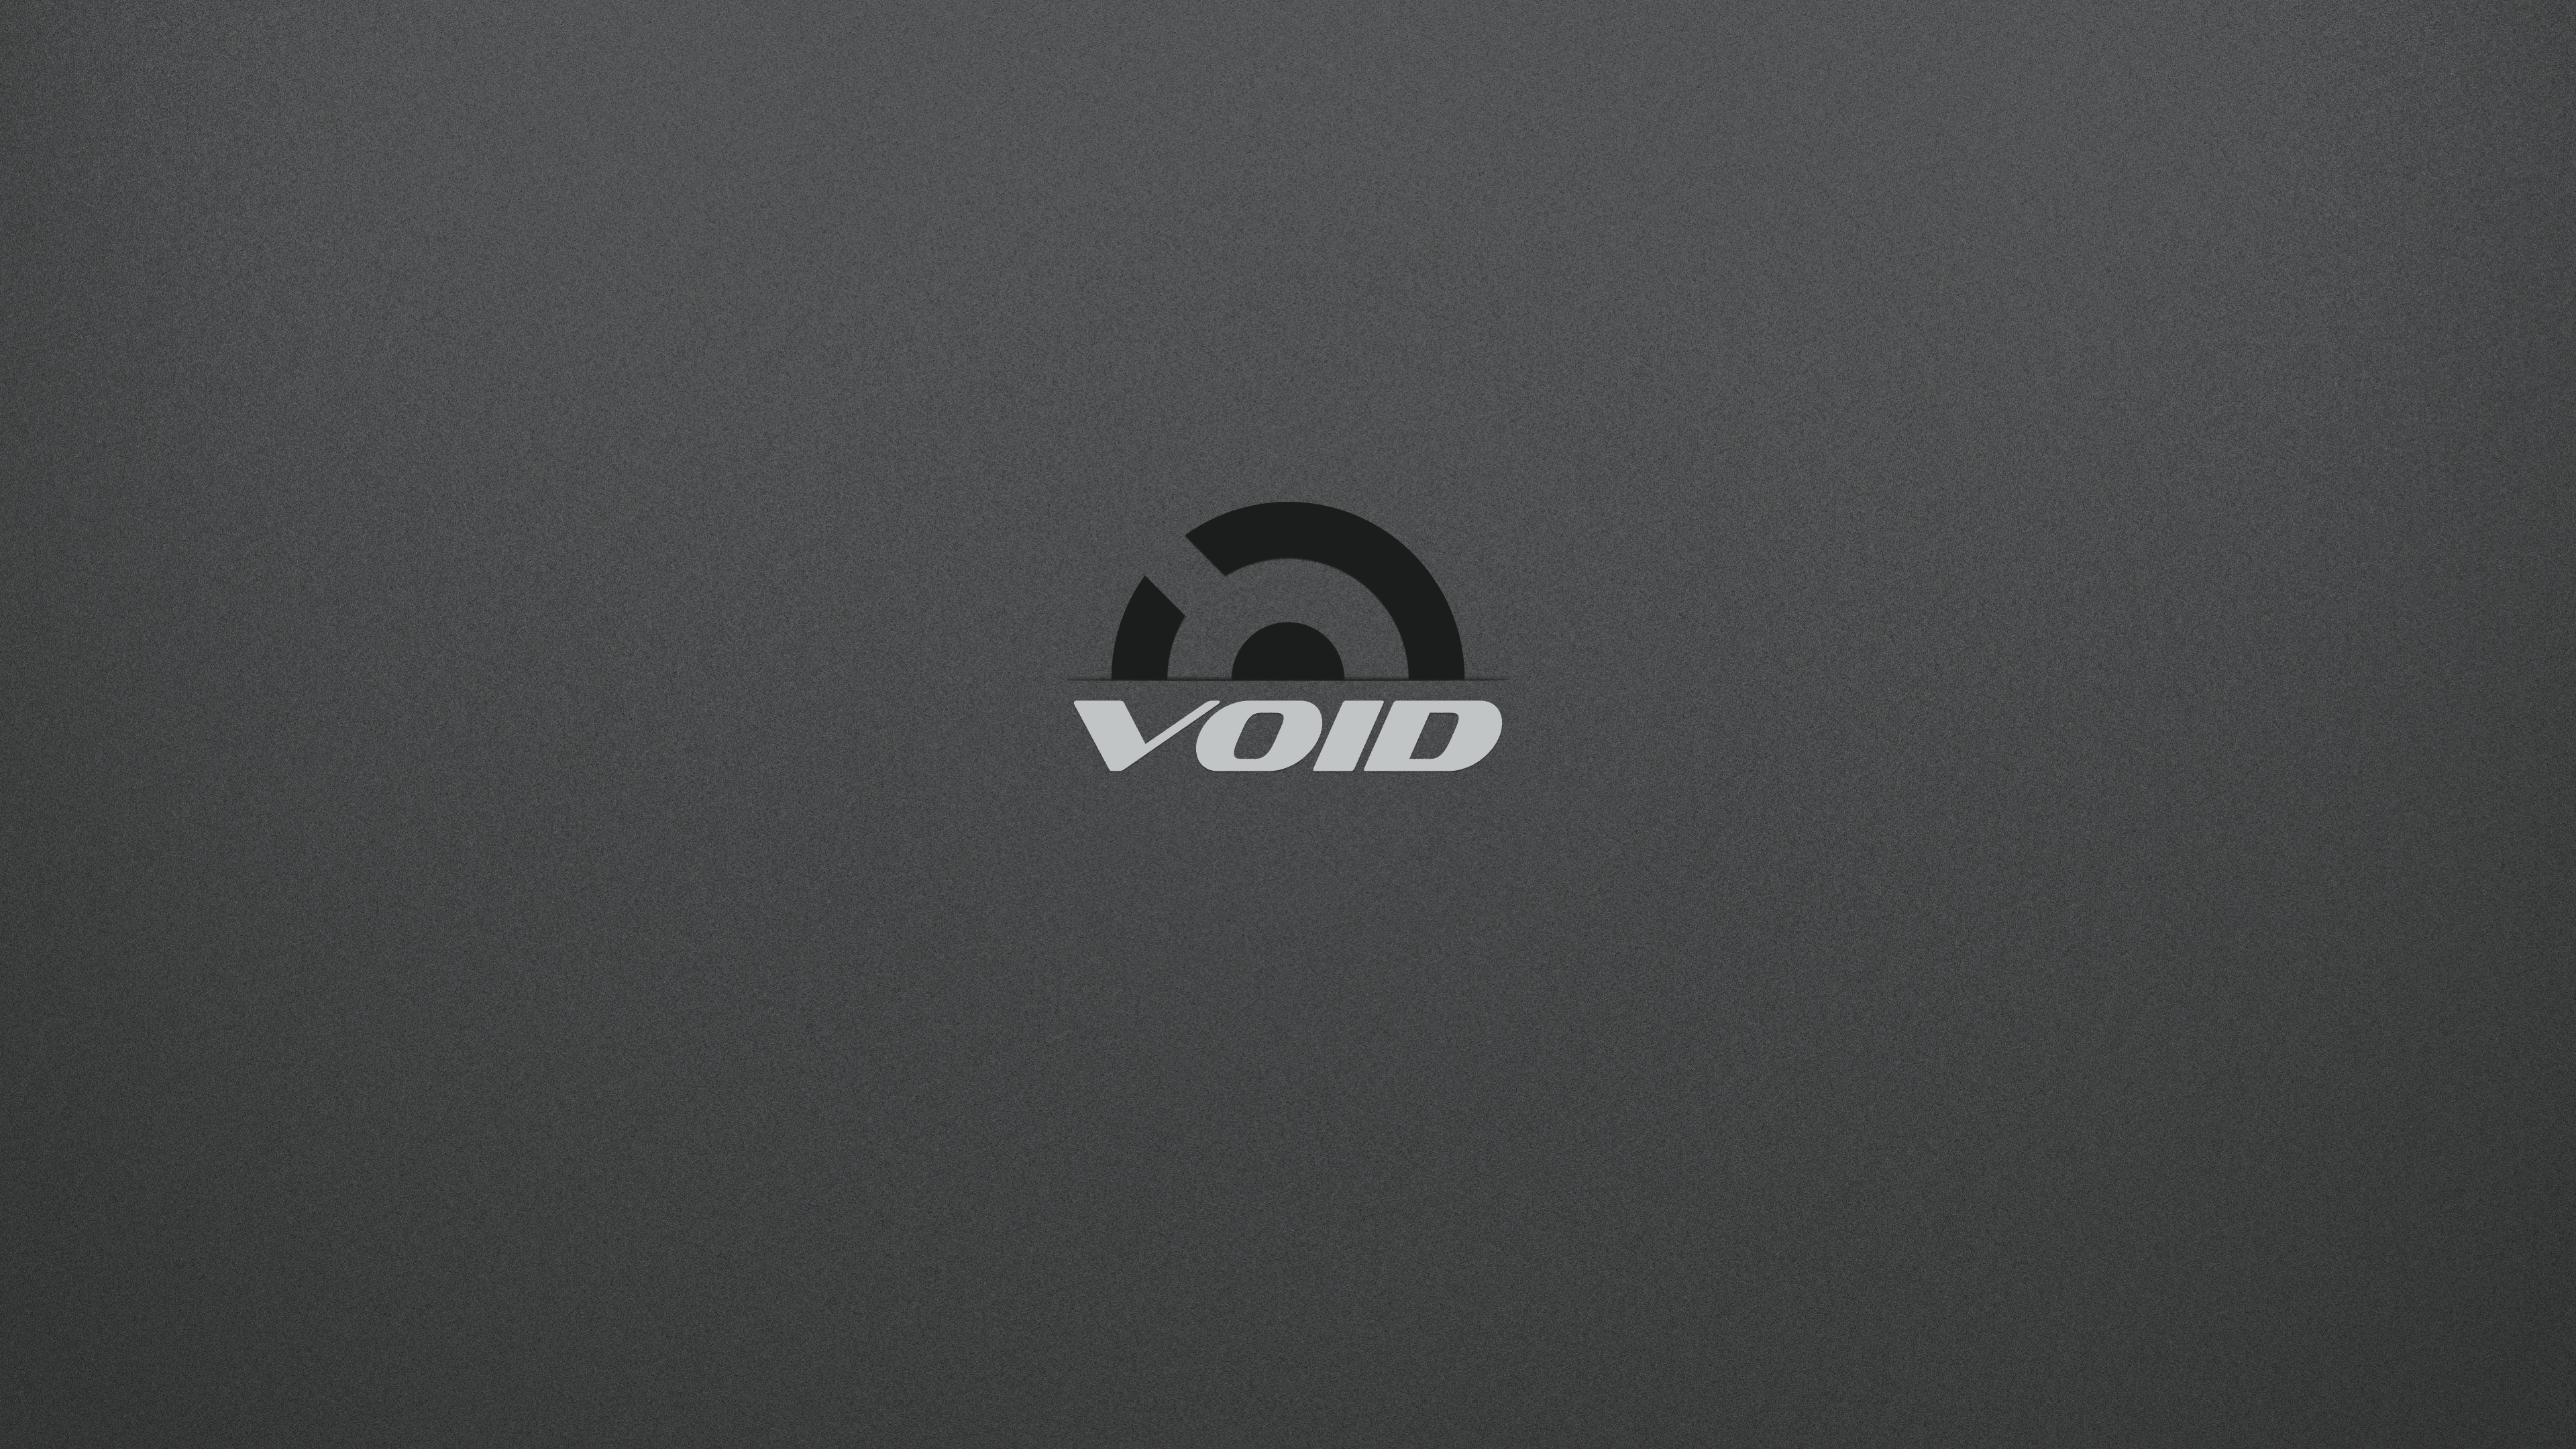 Void Linux Linux Operating System Minimalism 3840x2160